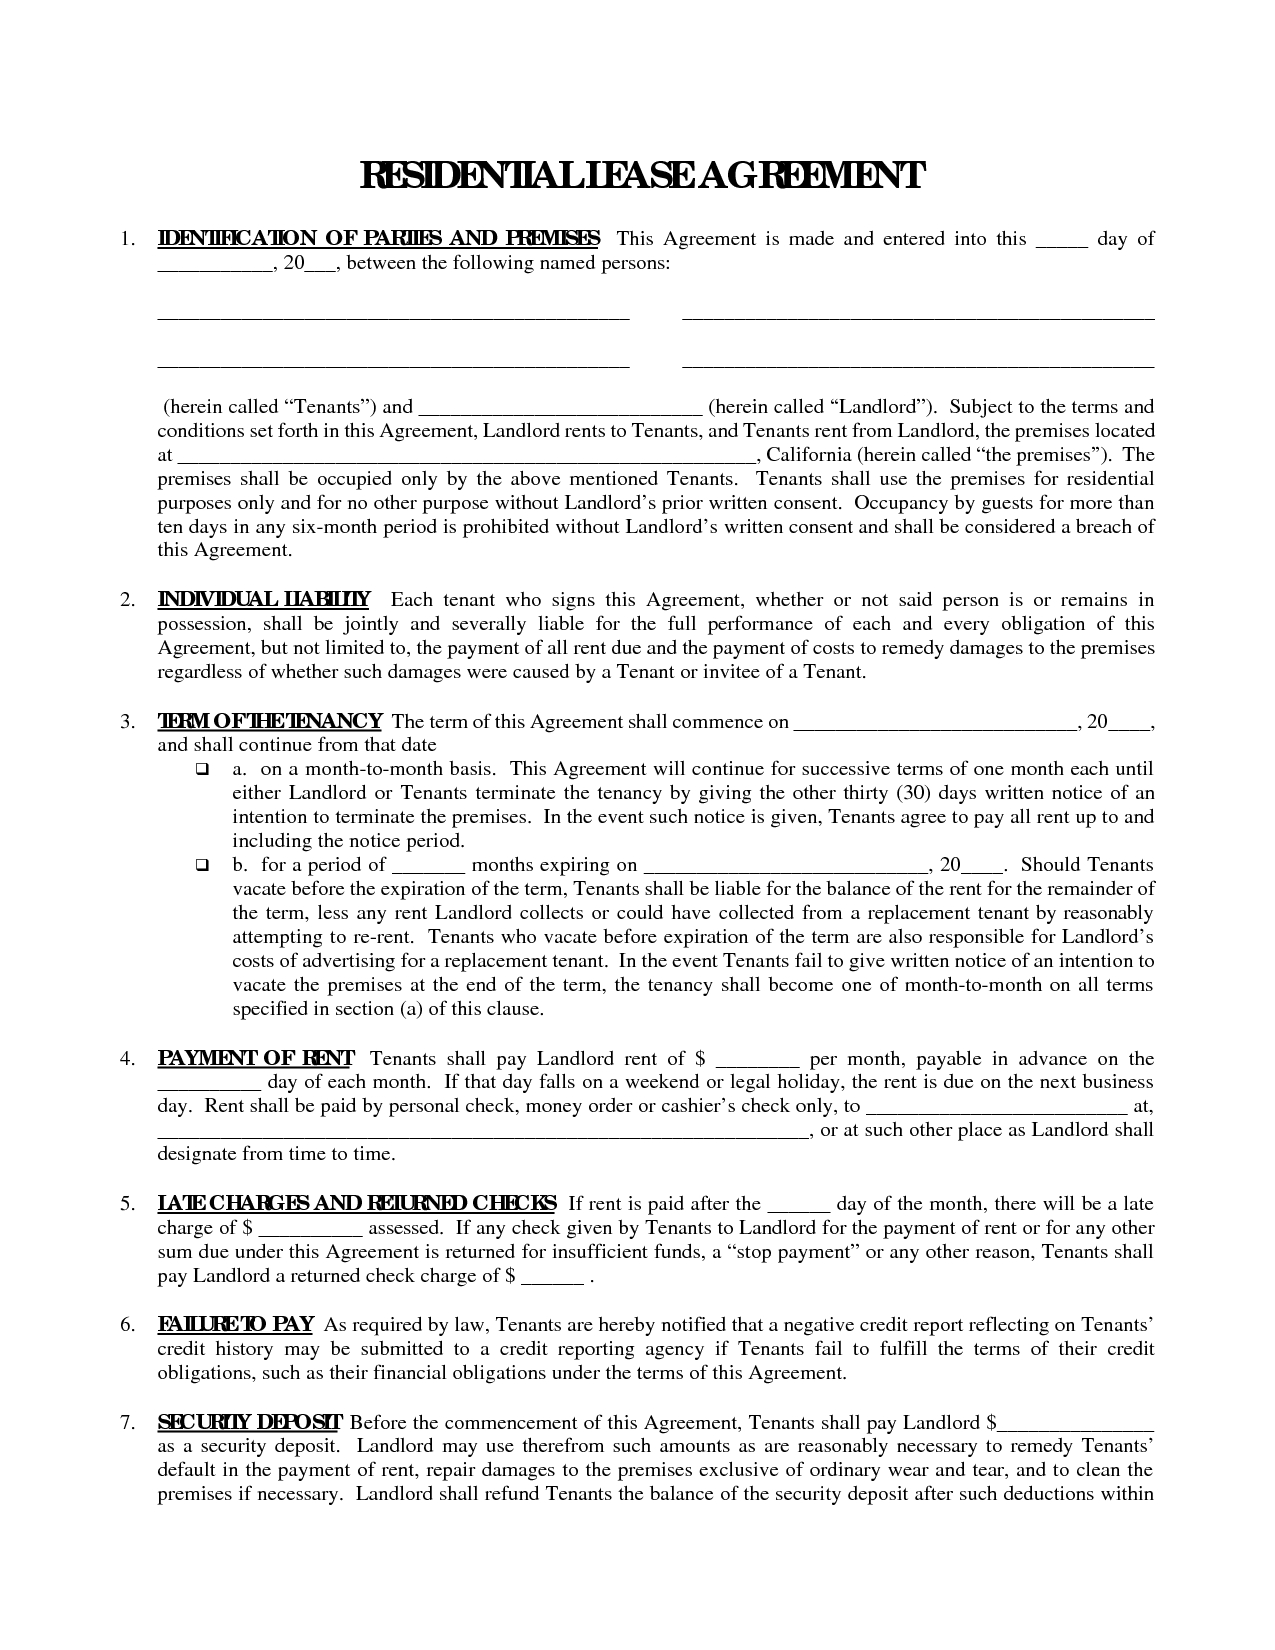 Printable Residential Free House Lease Agreement | Residential Lease - Free Printable Rental Lease Agreement